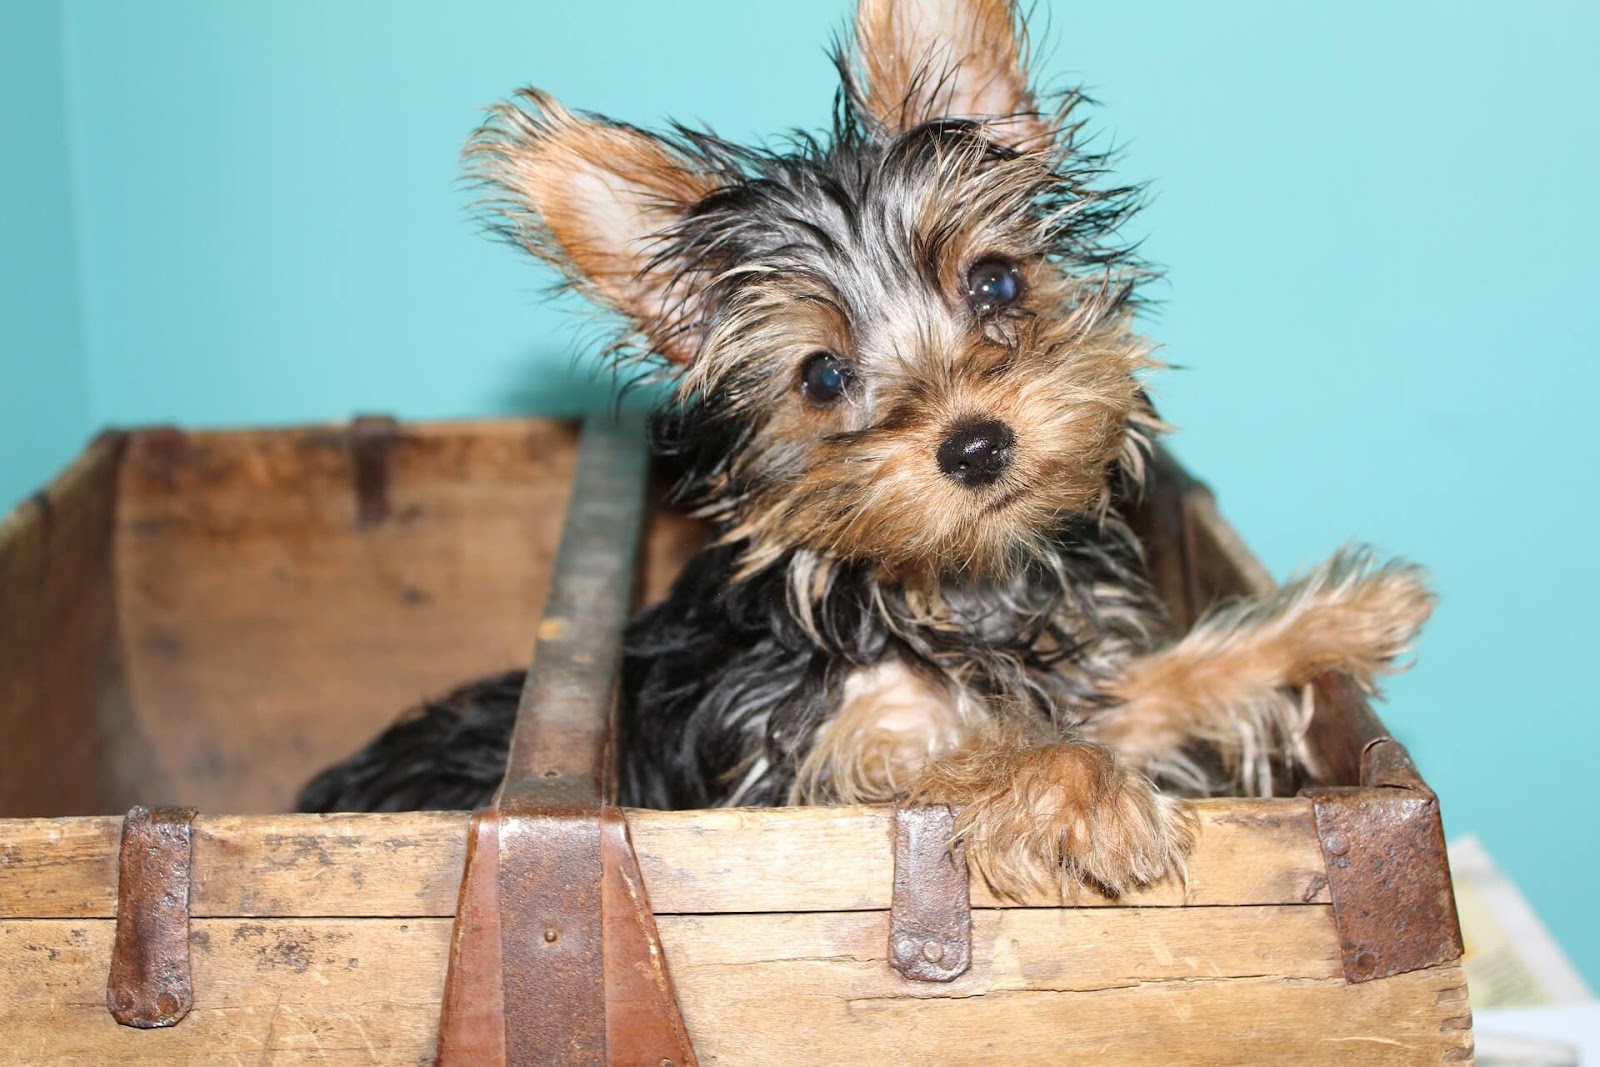 How To Crate Train A Yorkie?